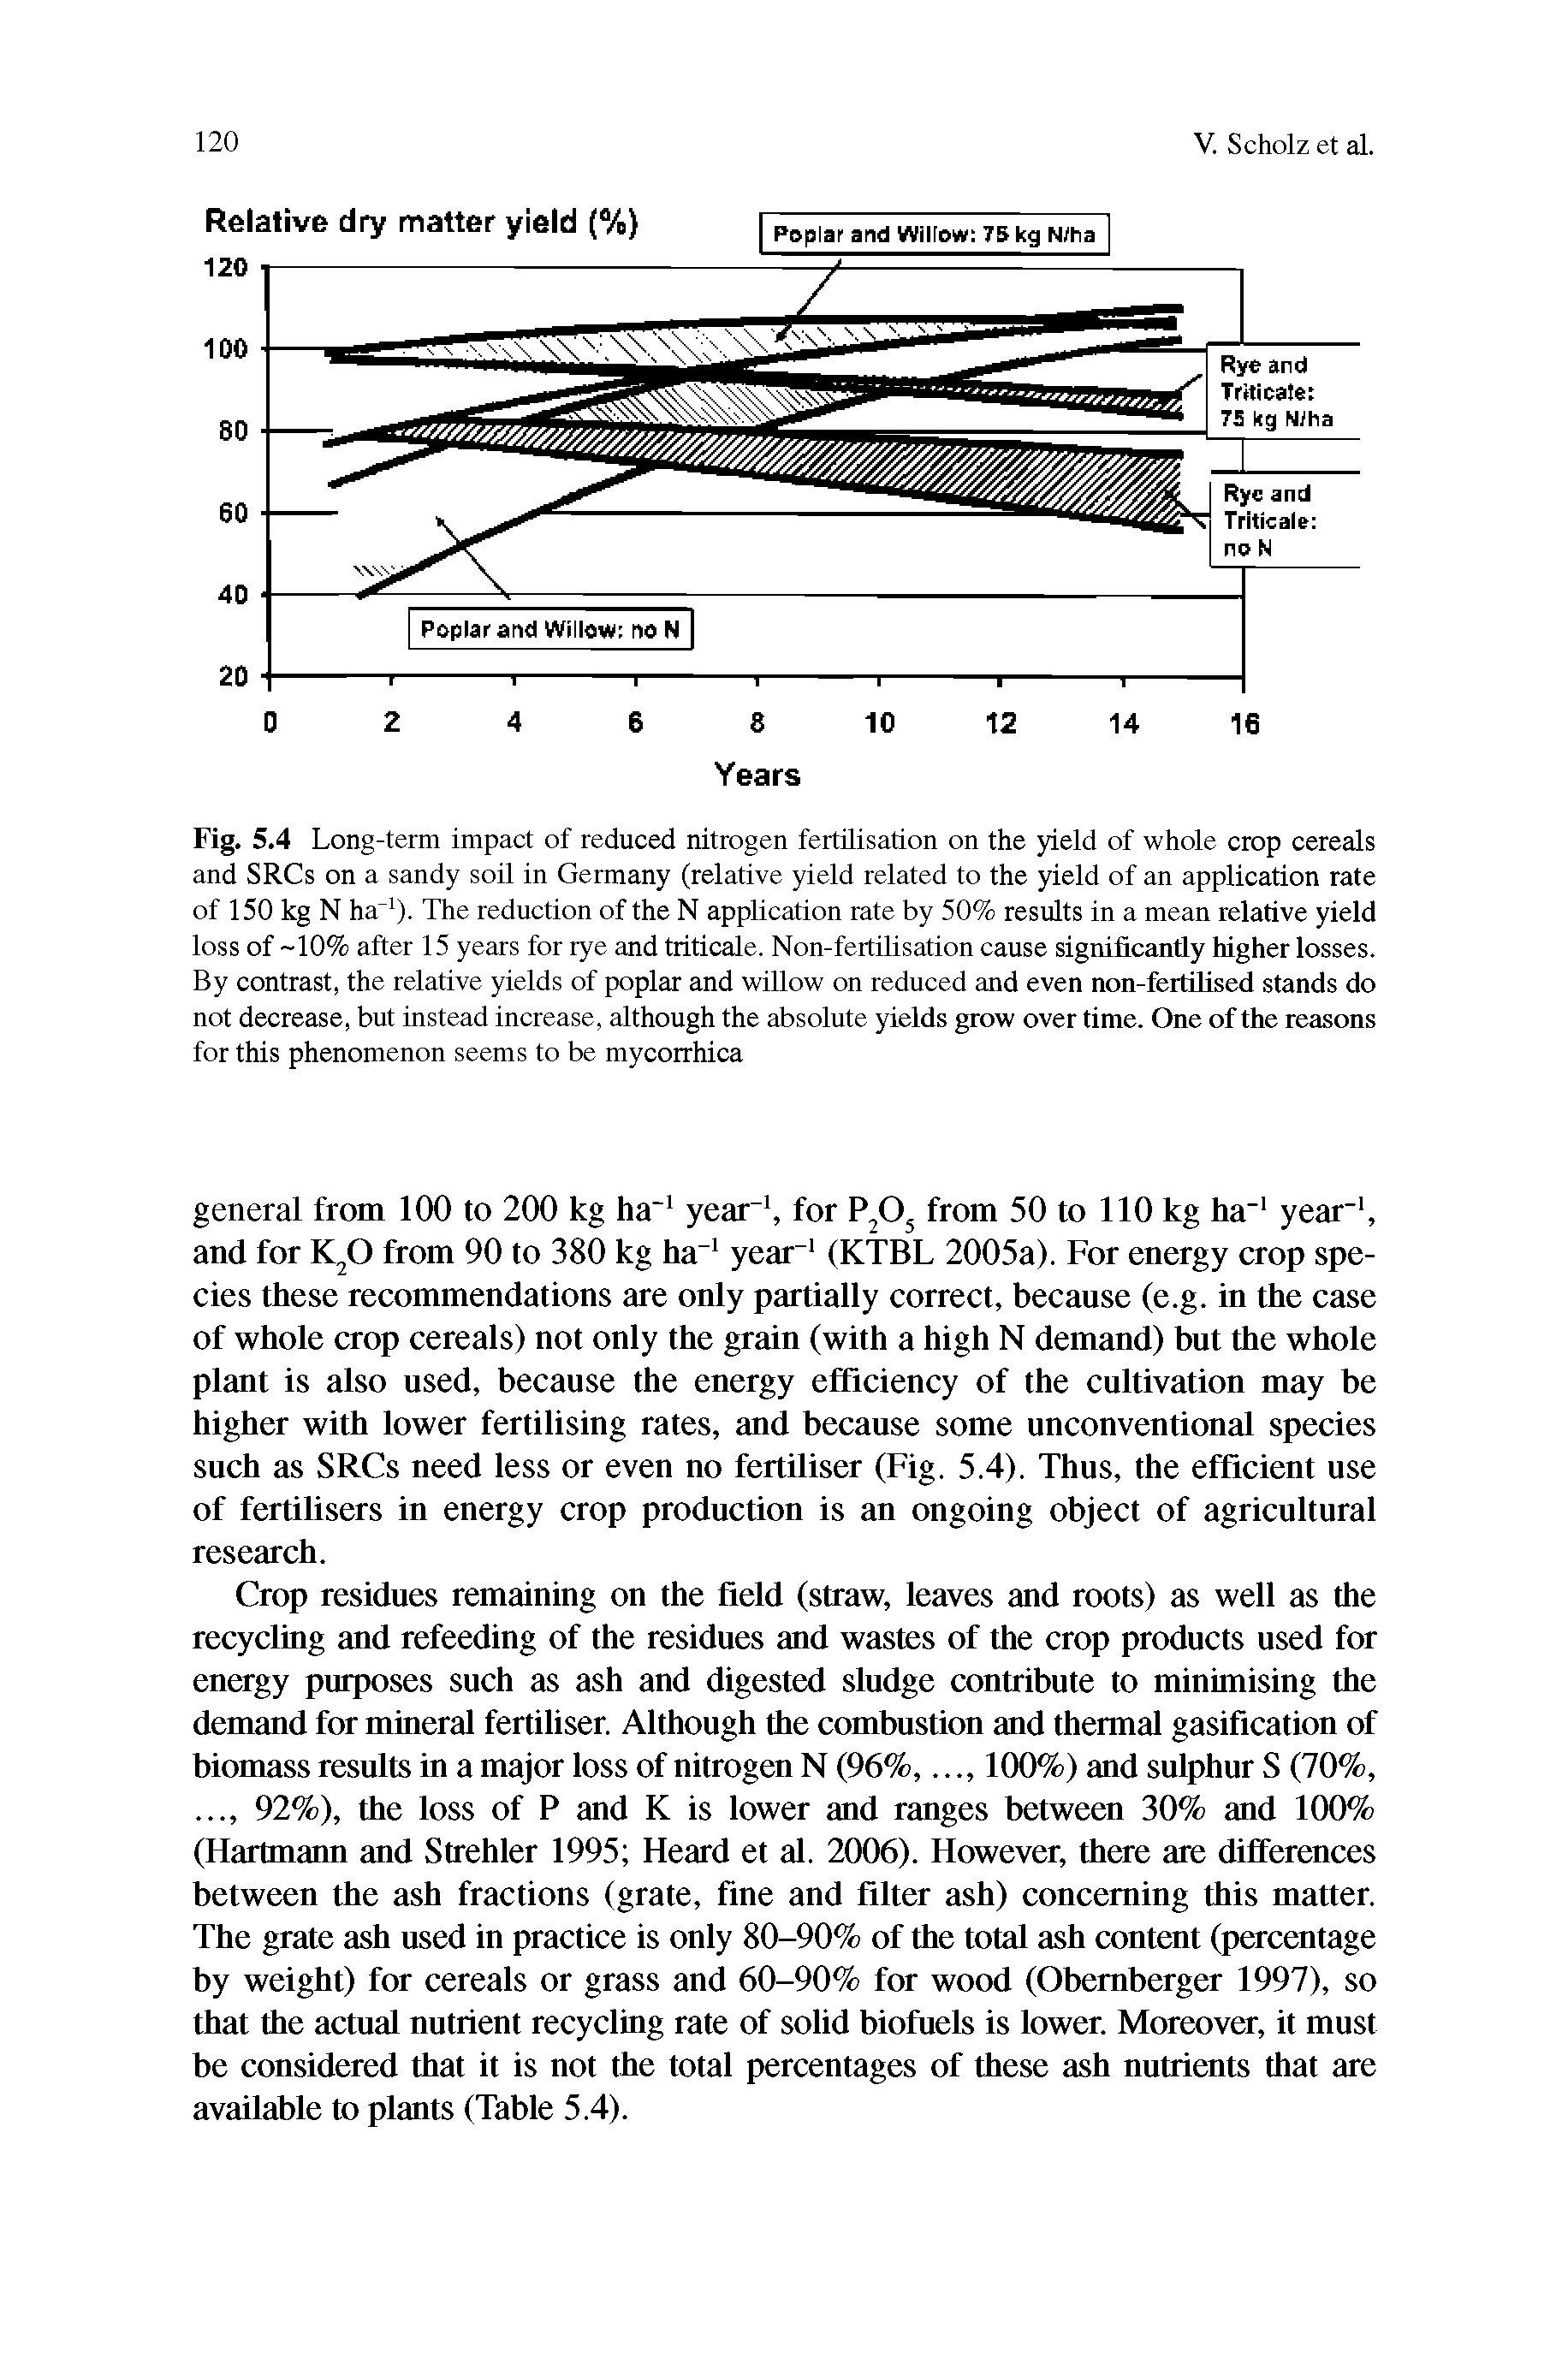 Fig. 5.4 Long-term impact of reduced nitrogen fertilisation on the yield of whole crop cereals and SRCs on a sandy soil in Germany (relative yield related to the yield of an application rate of 150 kg N ha-1). The reduction of the N application rate by 50% results in a mean relative yield loss of -10% after 15 years for rye and triticale. Non-fertilisation cause significantly higher losses. By contrast, the relative yields of poplar and willow on reduced and even non-fertilised stands do not decrease, but instead increase, although the absolute yields grow over time. One of the reasons for this phenomenon seems to be mycorrhica...